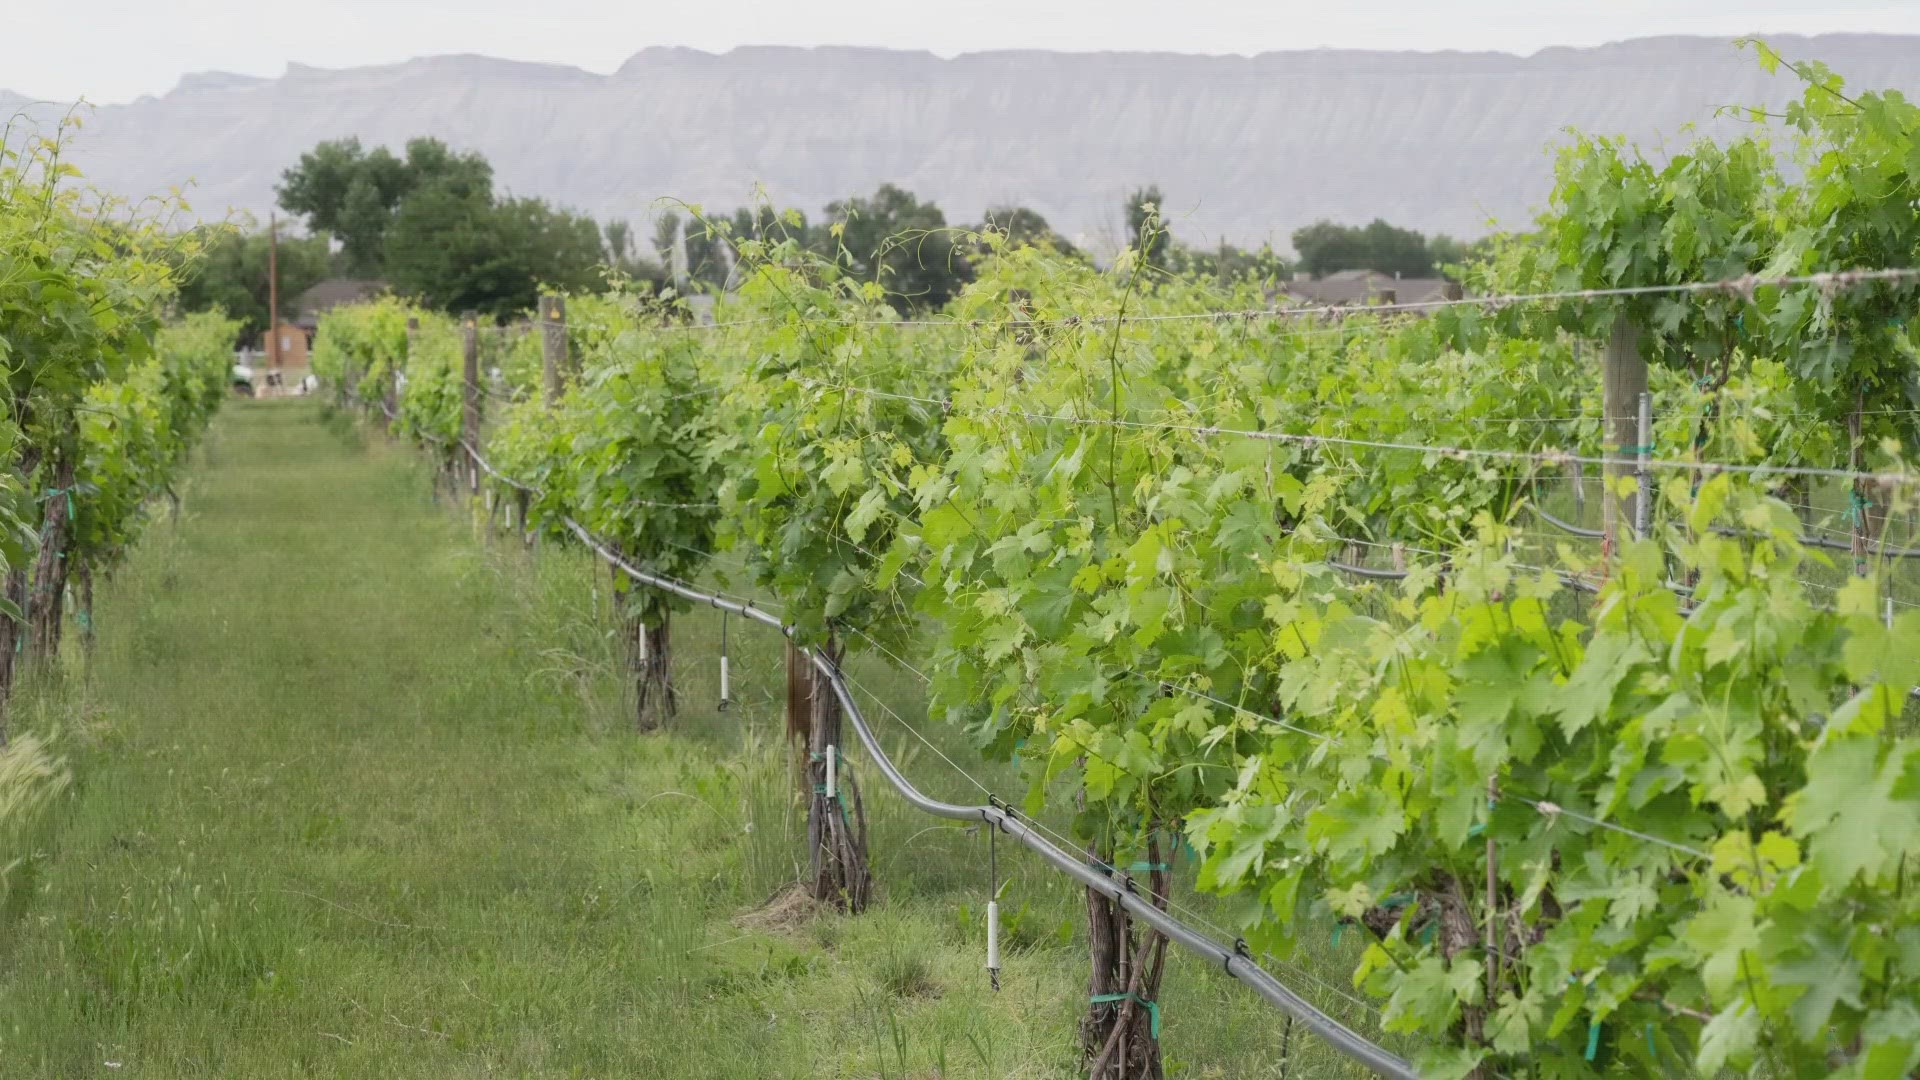 Colorado's wine industry is ripe for expansion as the climate changes.